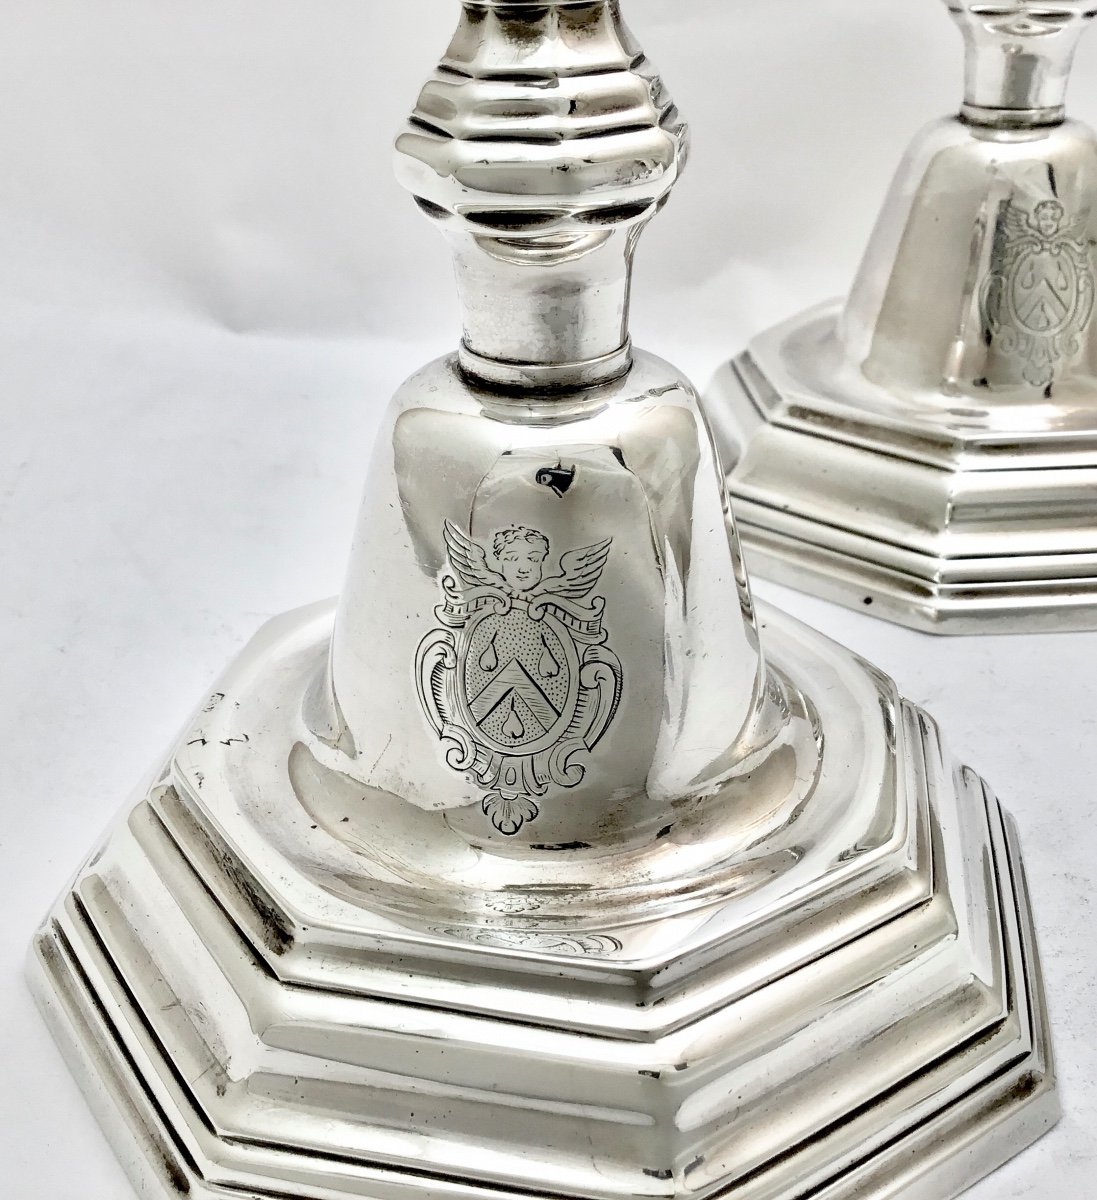 Dunkirk 1737, Pair Of Candlessterling Silver, “des Anges De Losven” Or “crabeels” Coat Of Arms